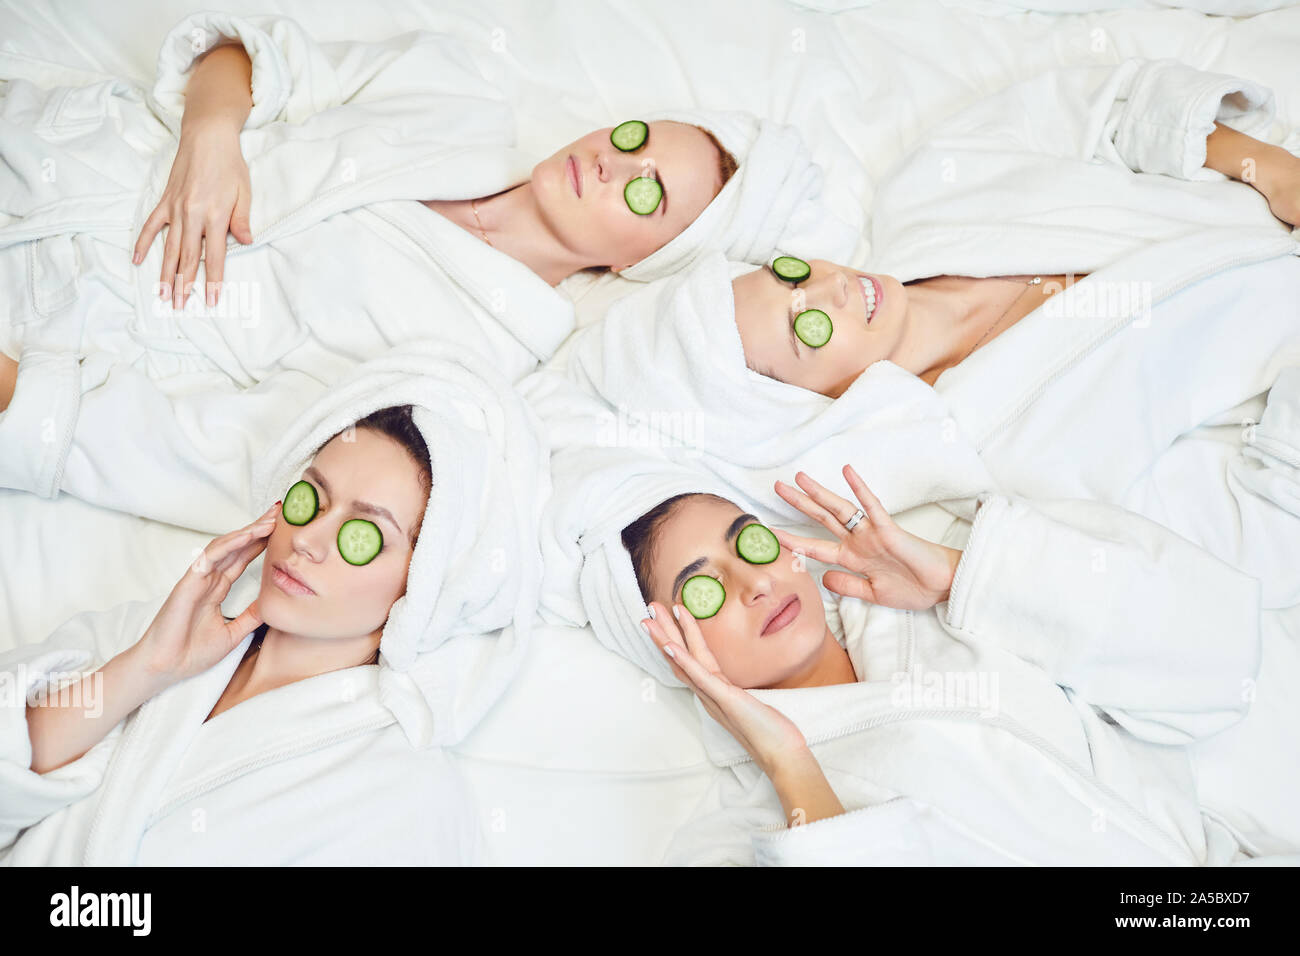 Chilling women in bathrobes with cucumber slices on face Stock Photo